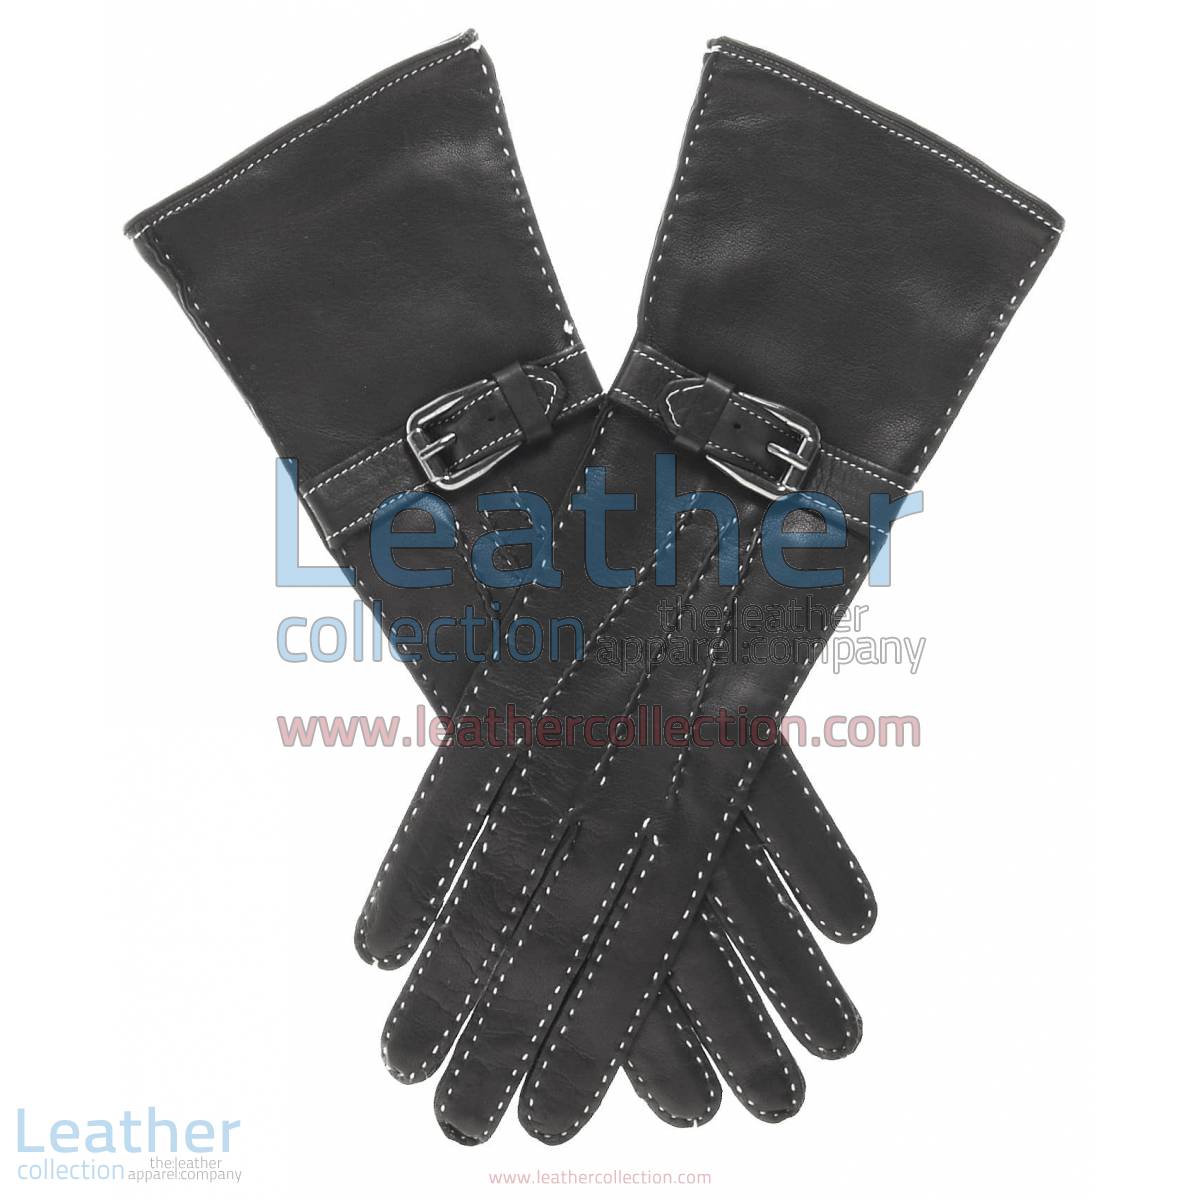 Silk Lined Leather Gloves with Decorative Buckle | silk lined leather gloves,leather gloves